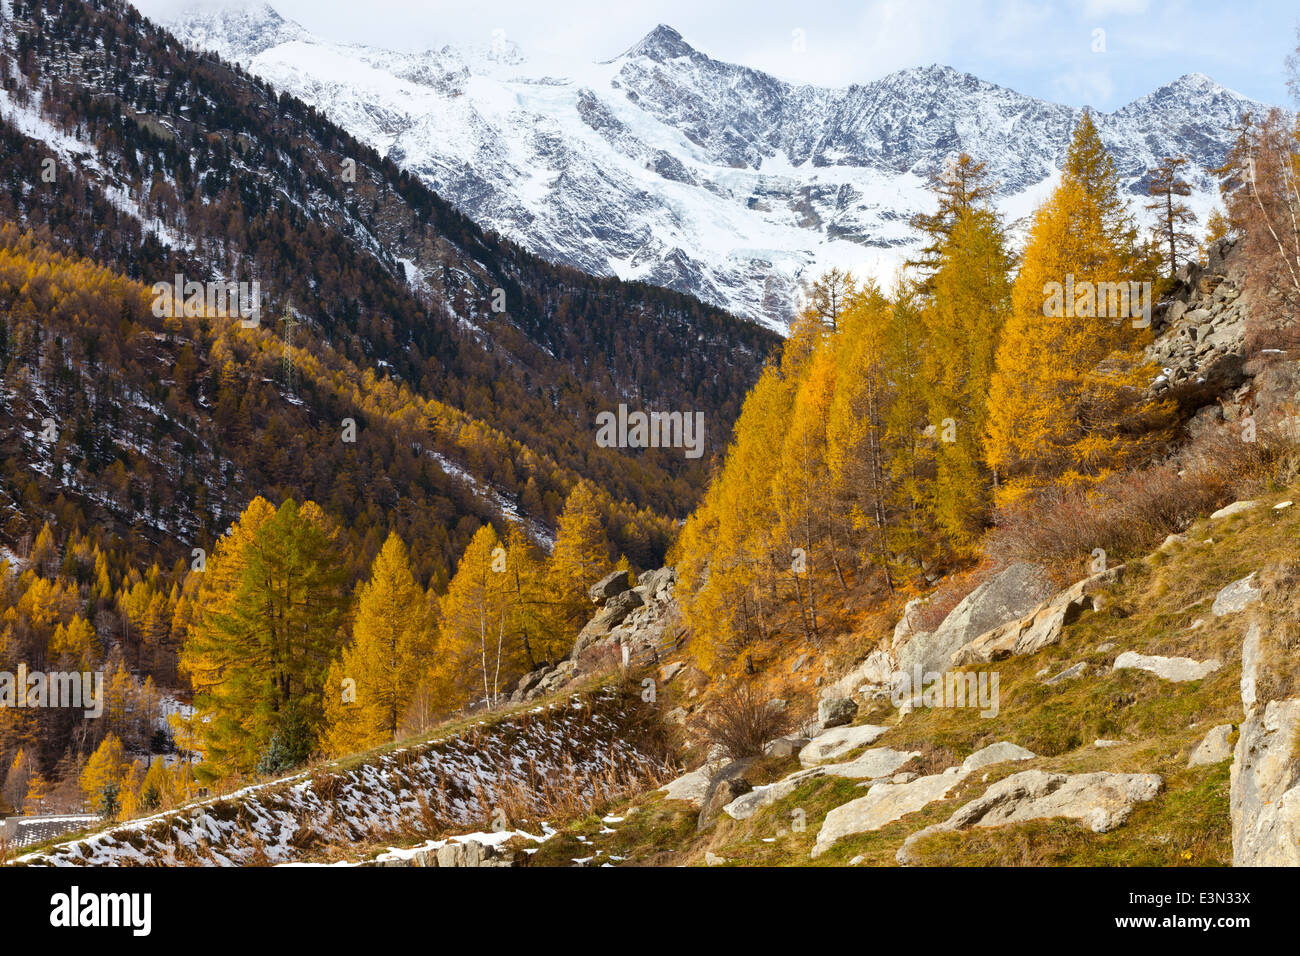 Swiss Alps mountains near Saas Fee in Saas Valley with snow peaks and autumn colourful trees, with exposed rocks, alpine plants Stock Photo